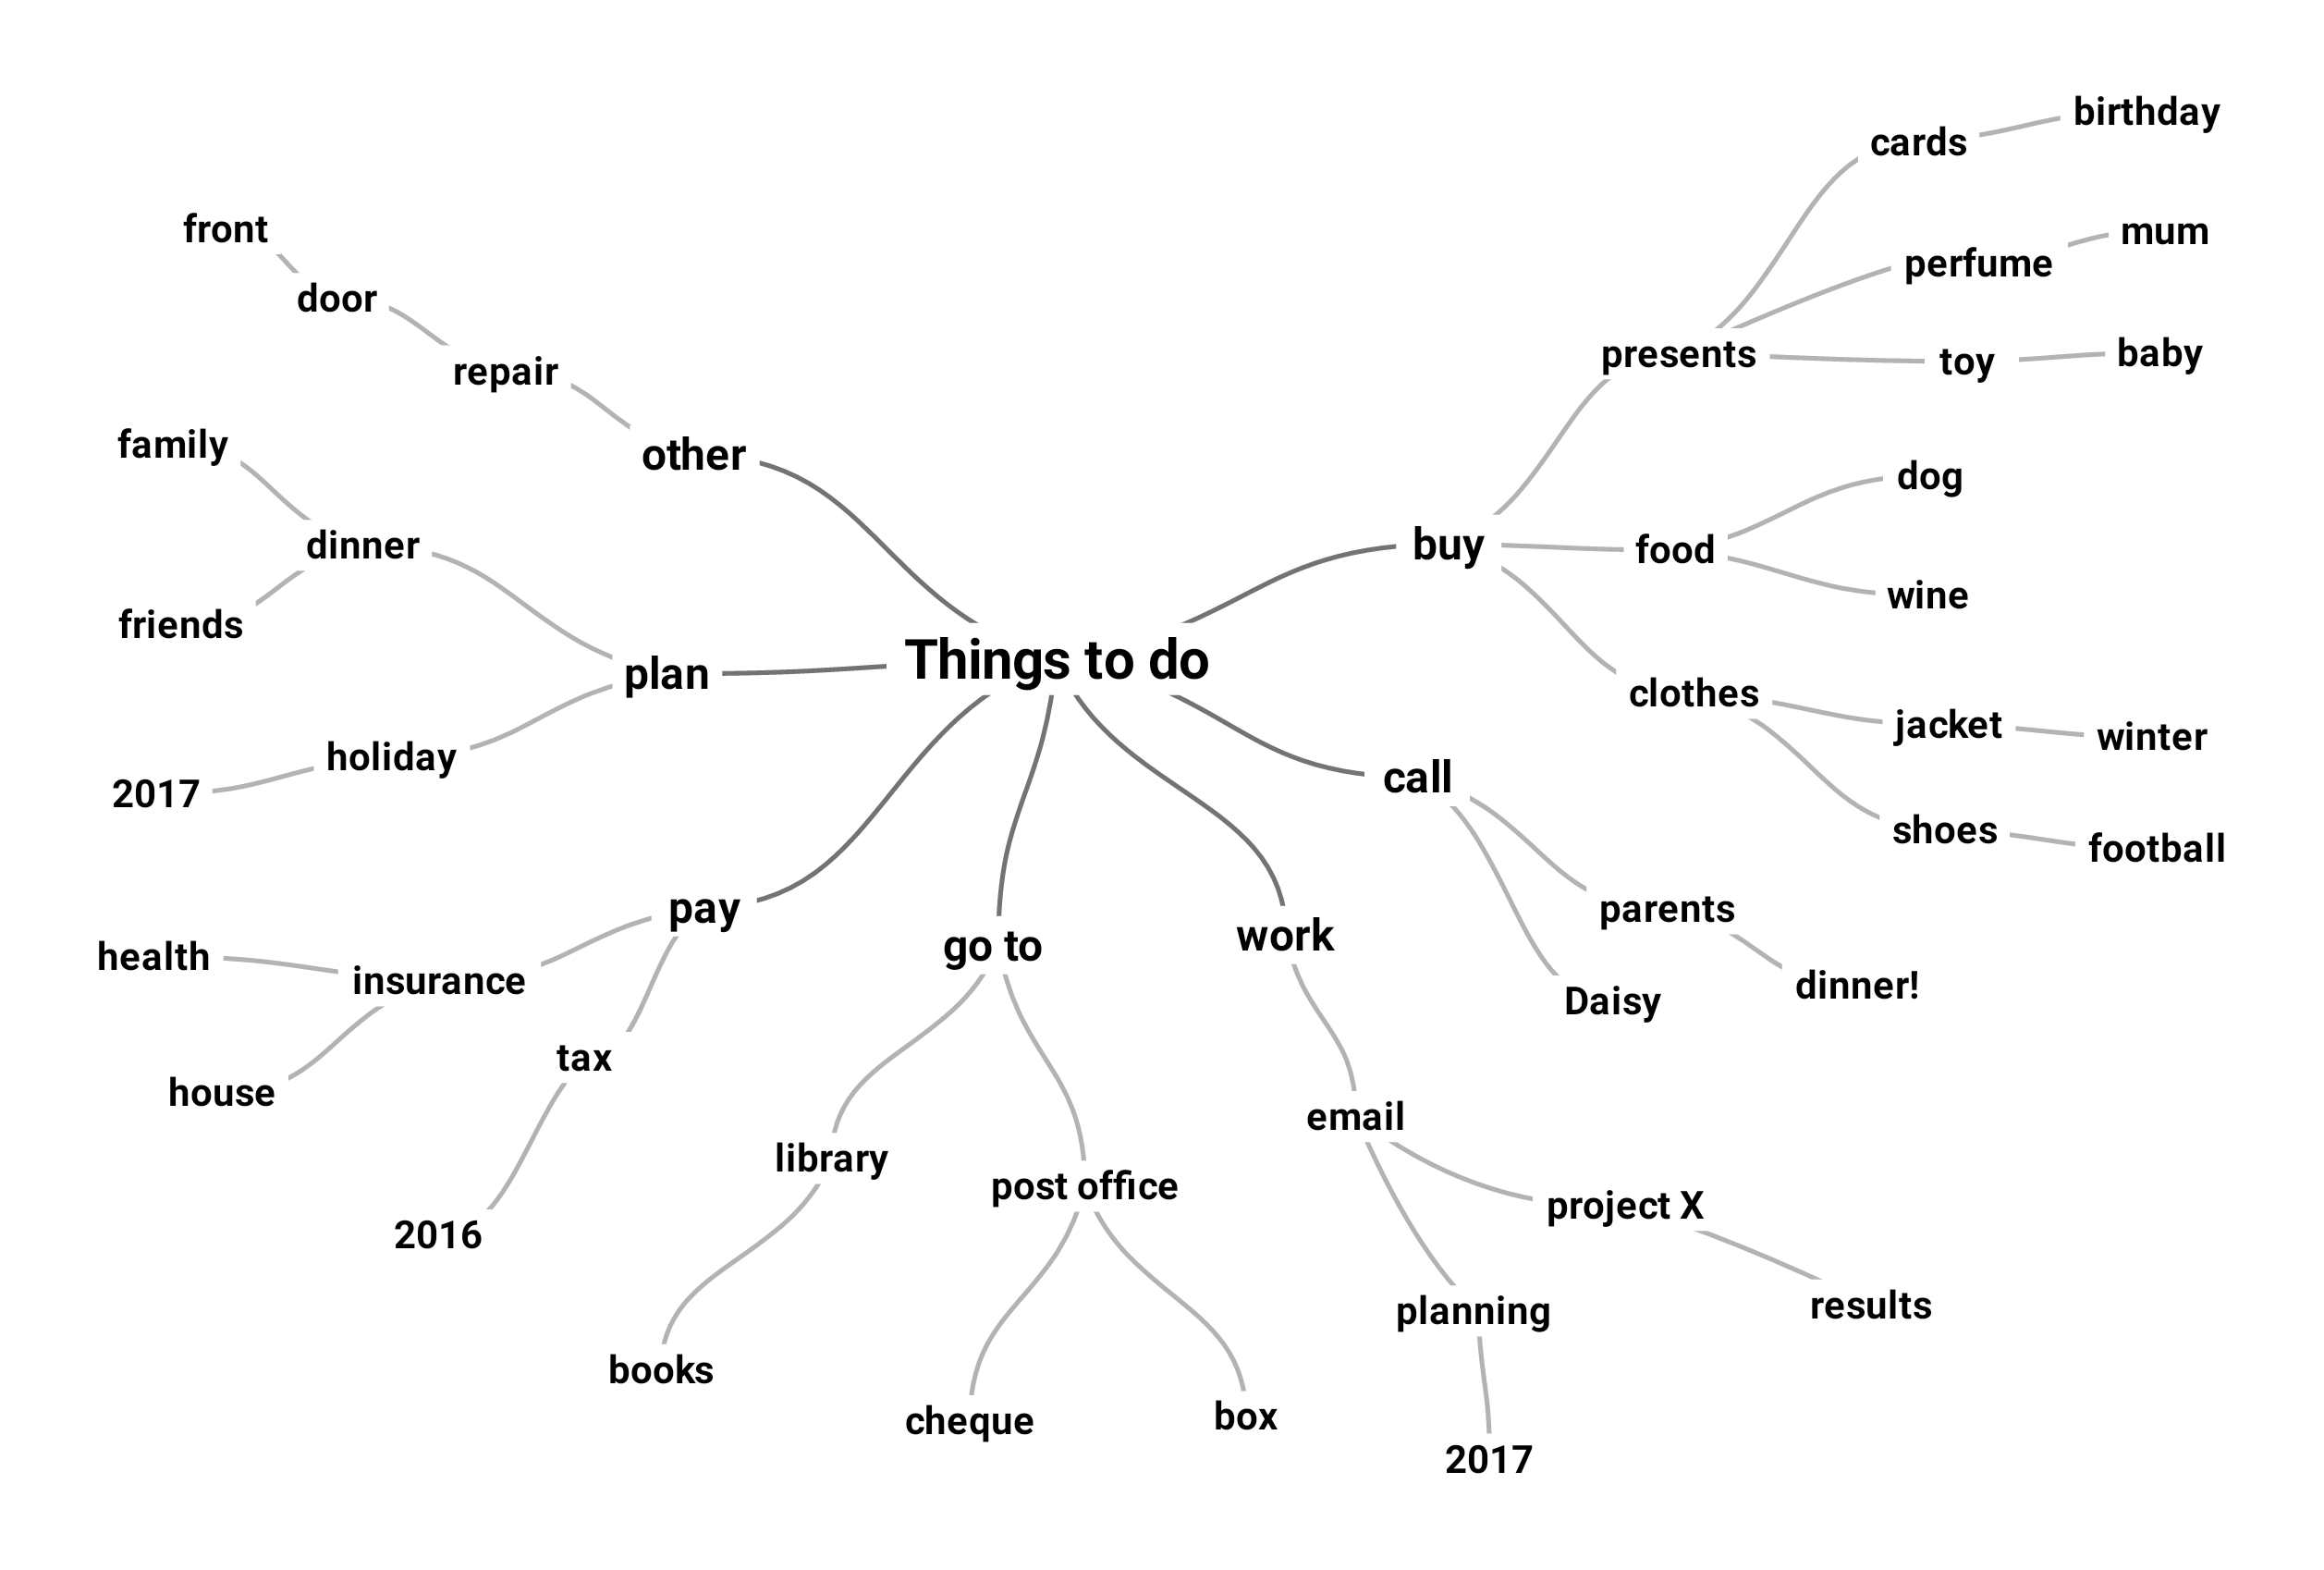 More specifics are added till the mind map is complete.